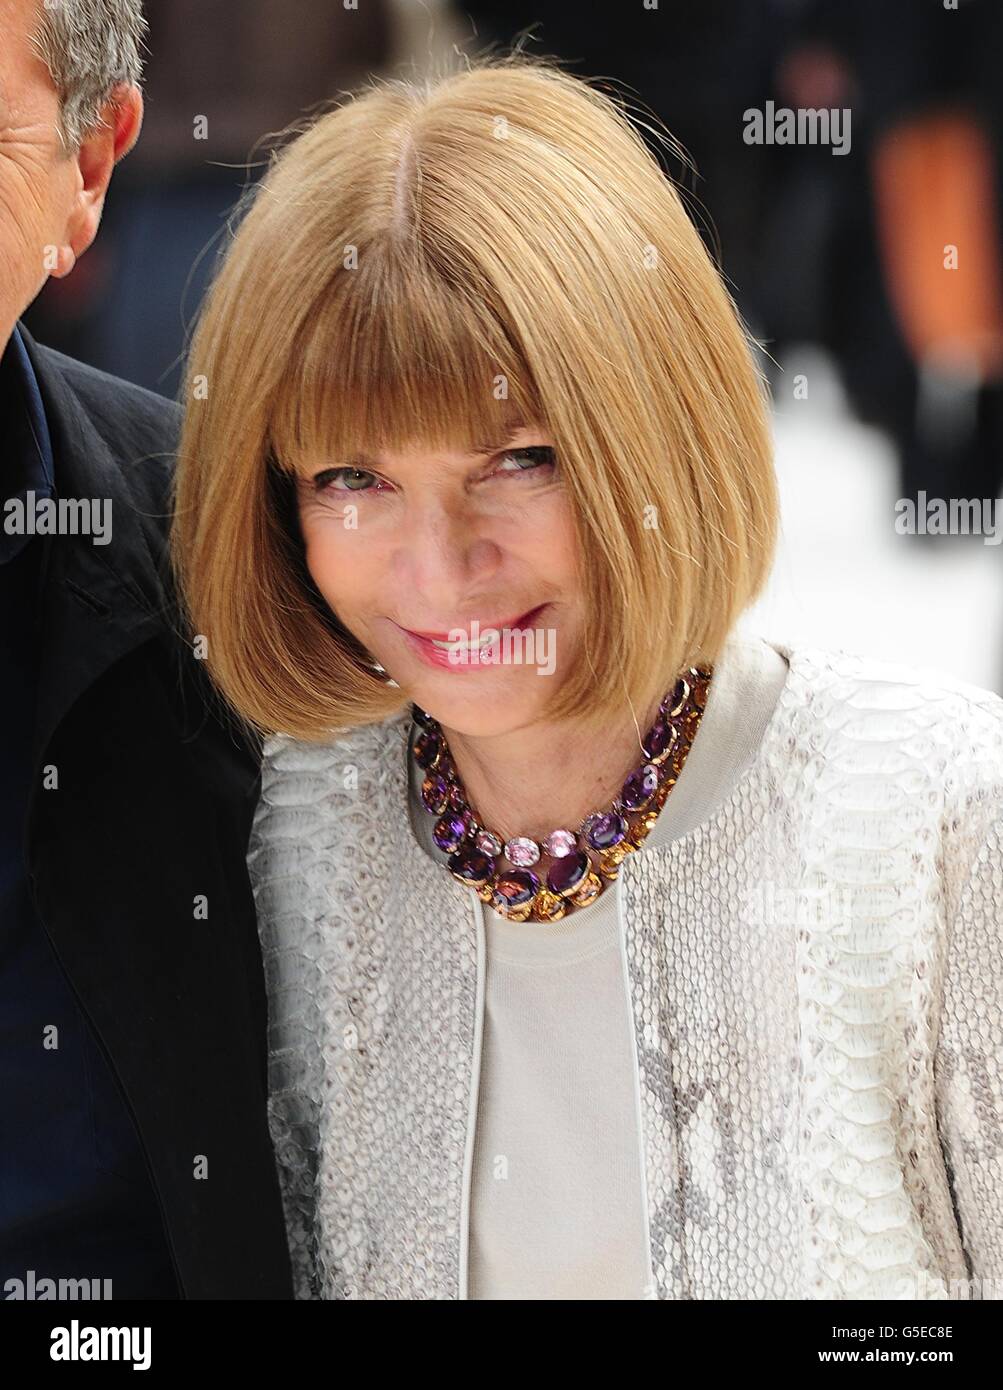 Anna wintour arriving for the show at kensington gardens hi-res stock ...